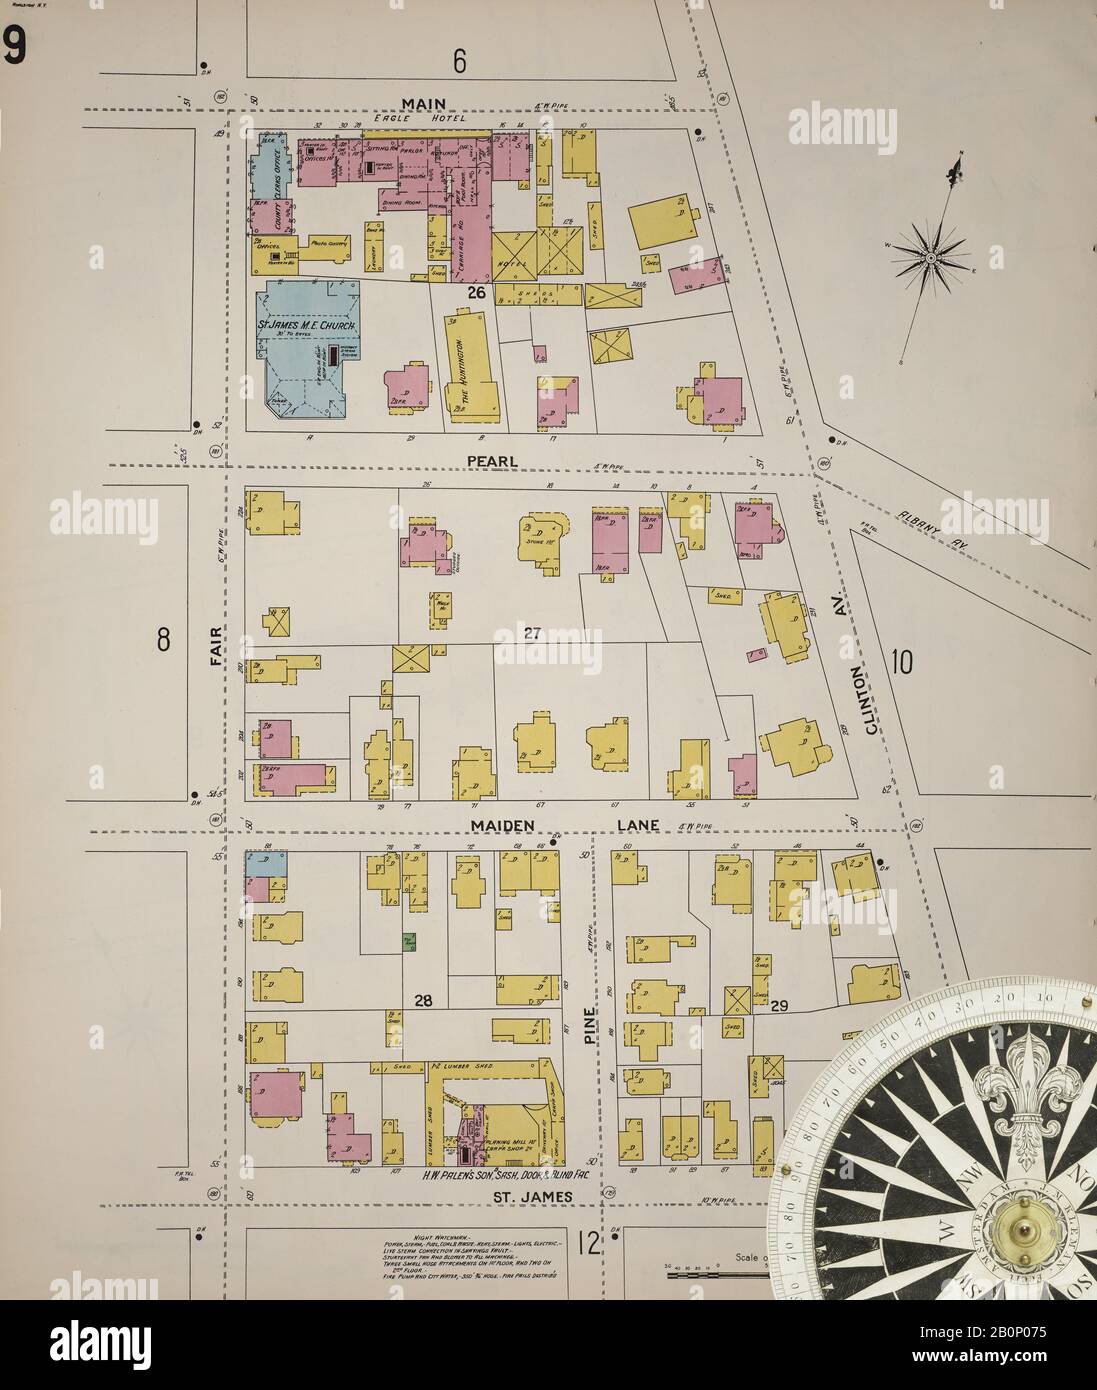 Image 10 Of Sanborn Fire Insurance Map From Kingston Ulster County New York 1899 69 Sheets Bound America Street Map With A Nineteenth Century Compass 2B0P075 